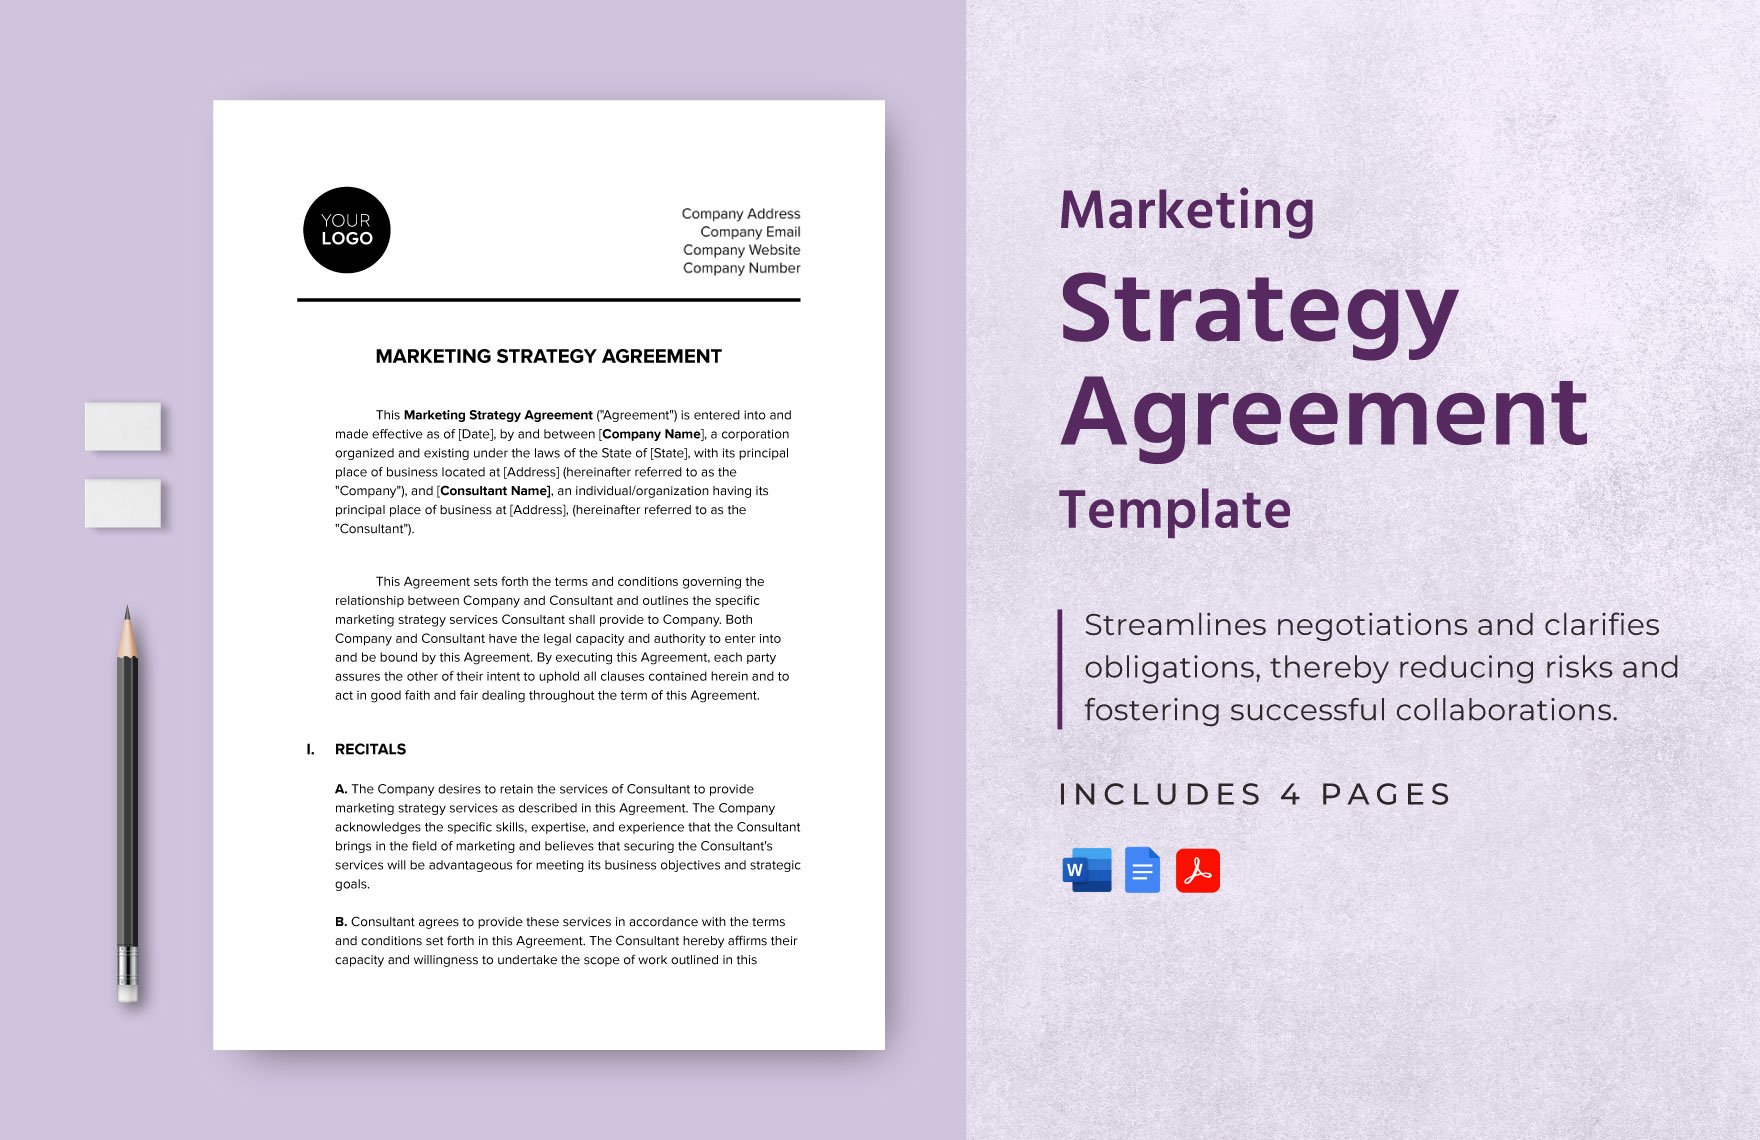 Marketing Strategy Agreement Template in Word, Google Docs, PDF